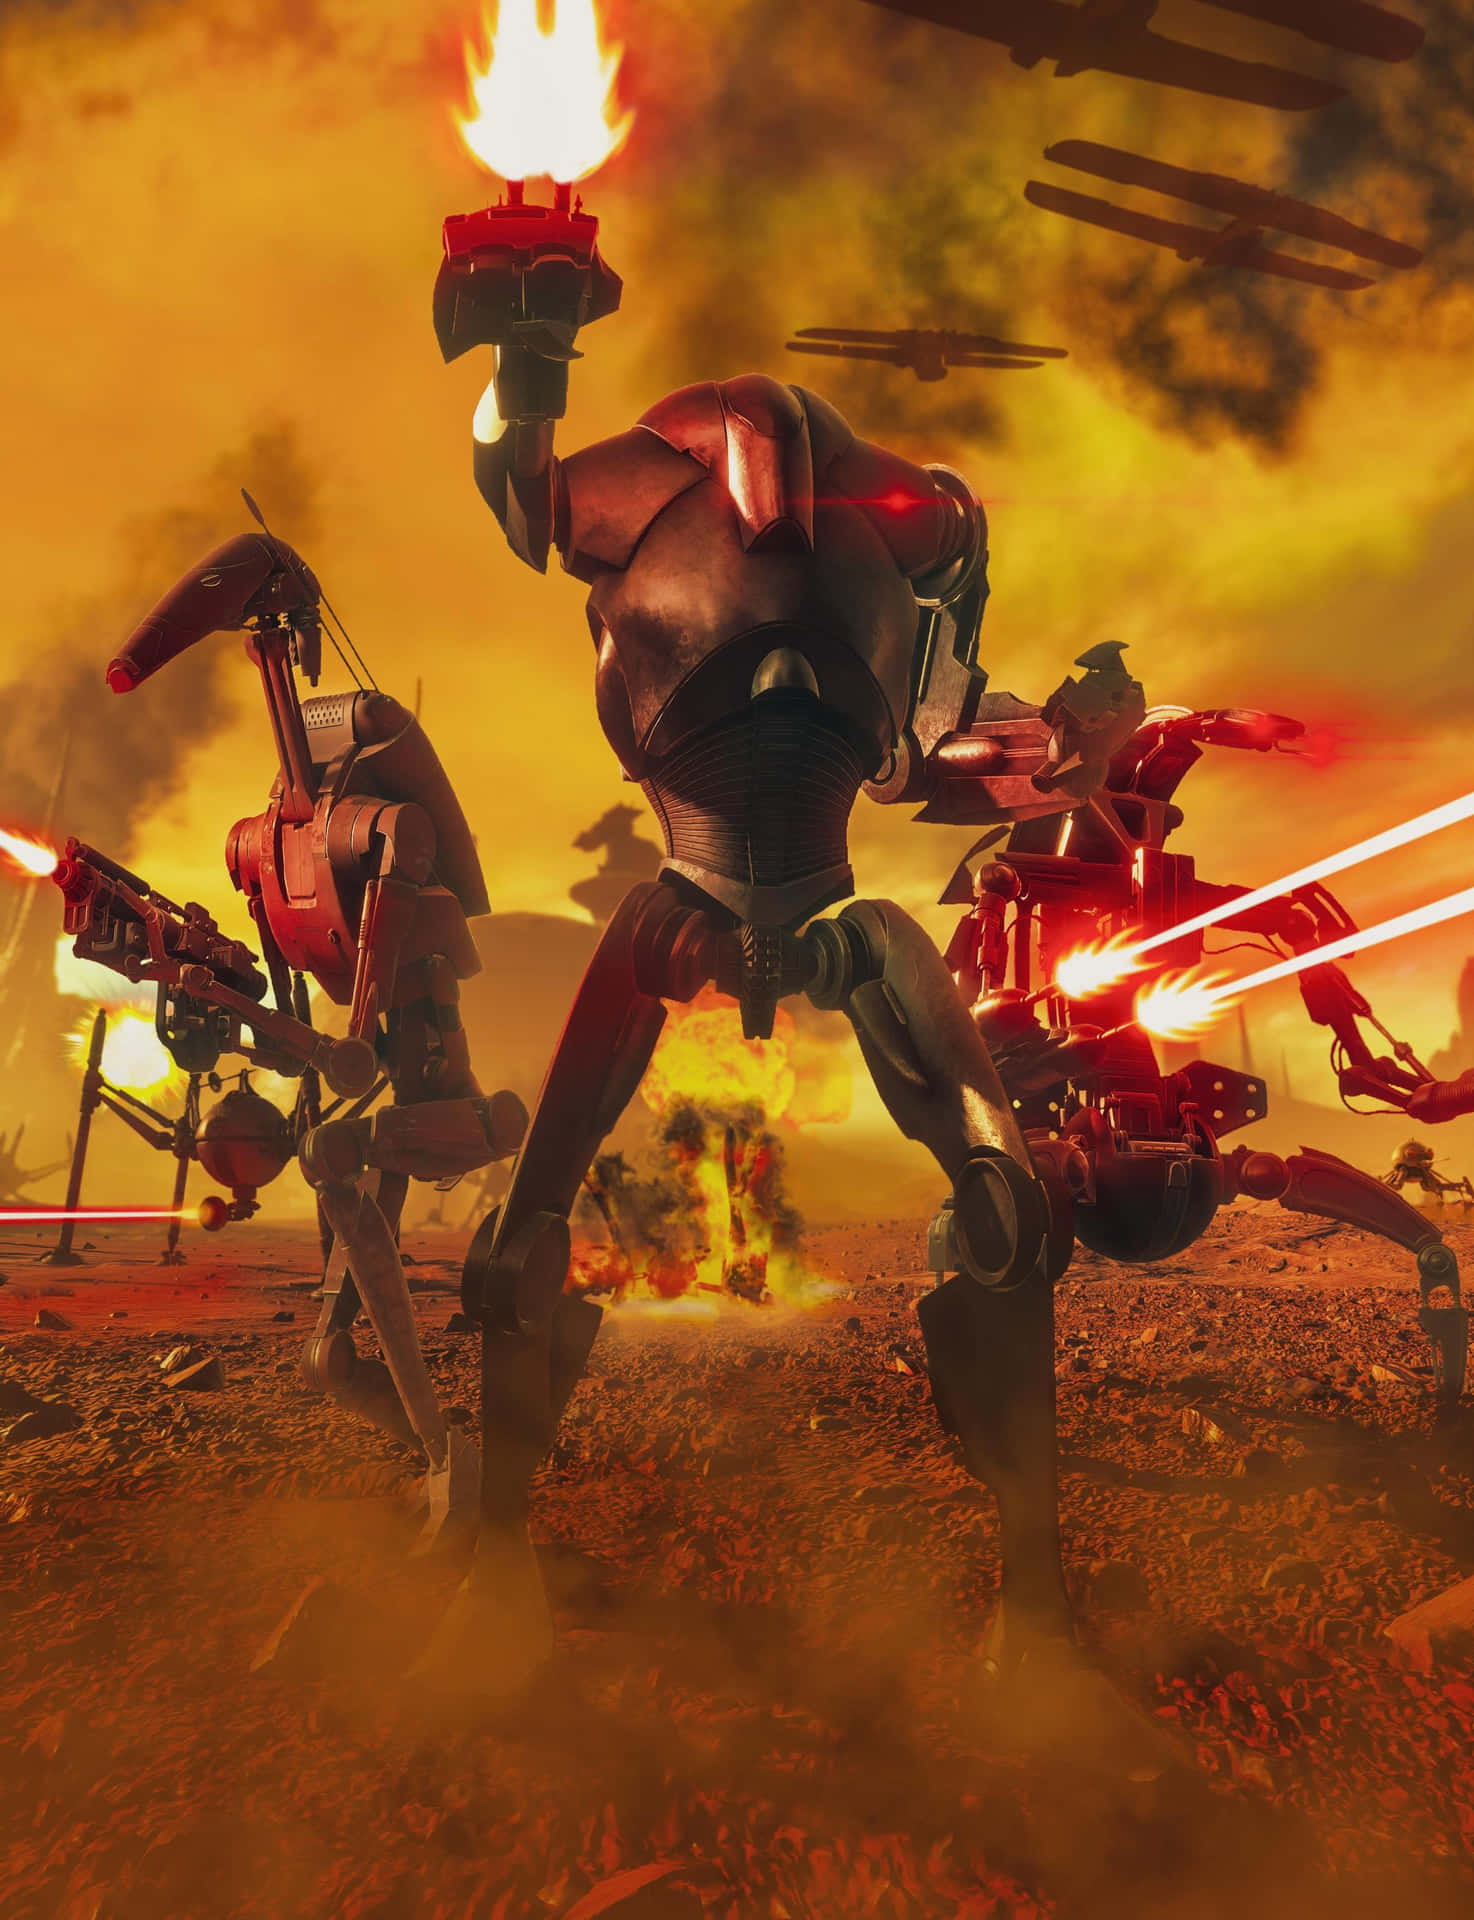 Prepare to Experience the Future with Droid Army Wallpaper